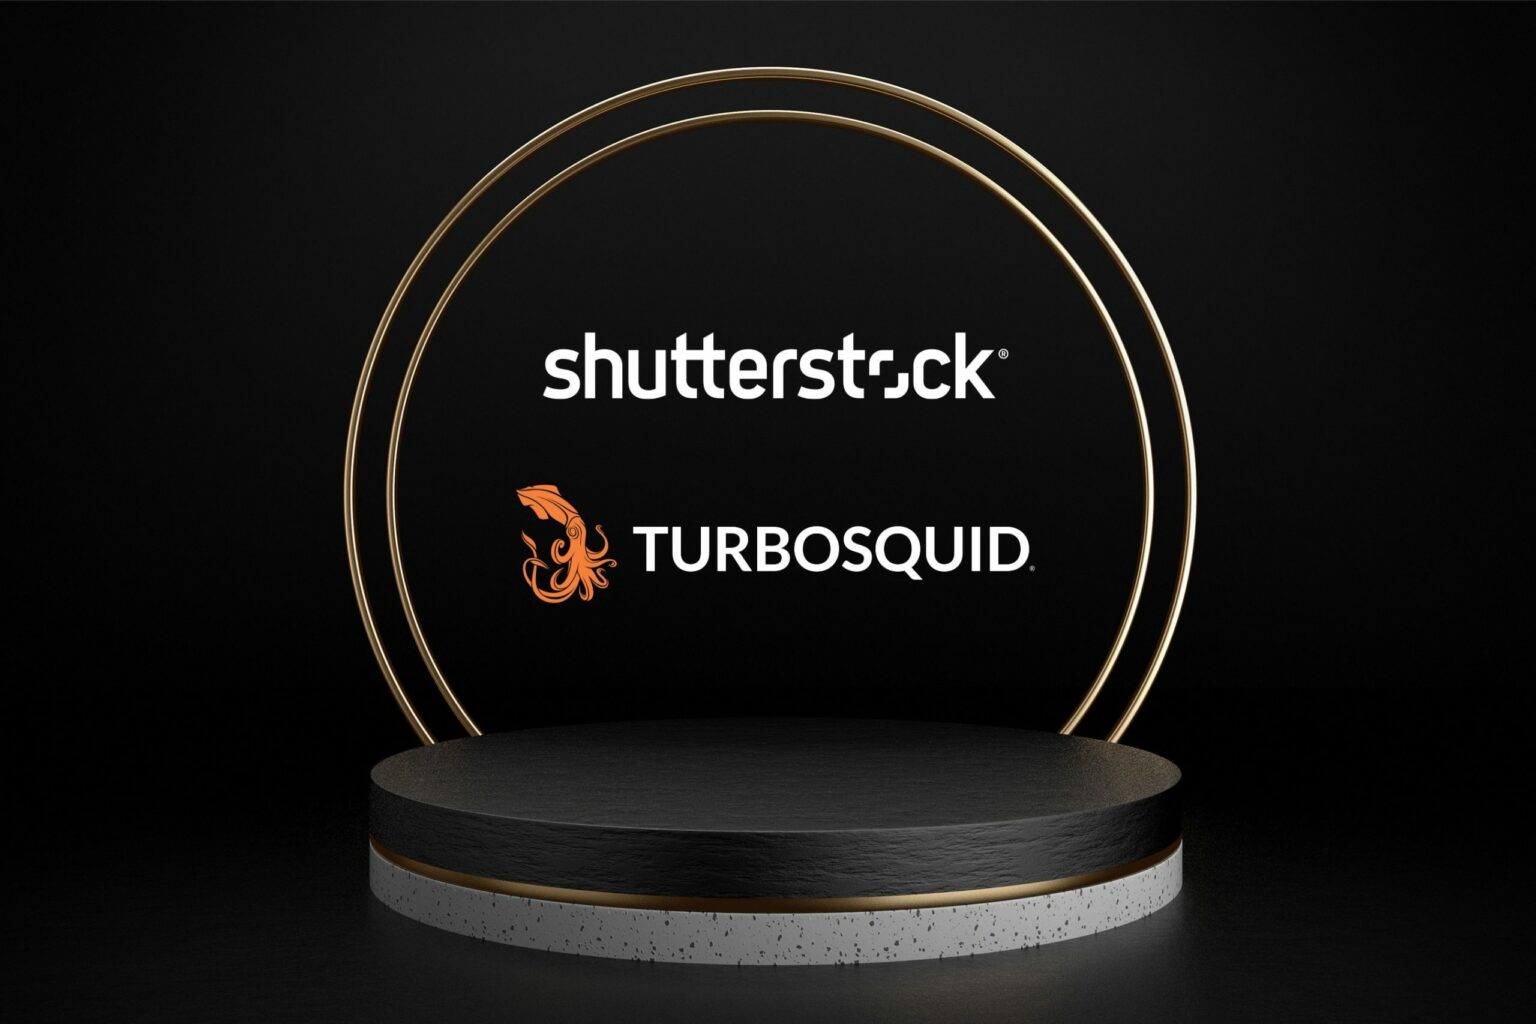 Shutterstock buys Turbosquid for $75million and moving into CGI